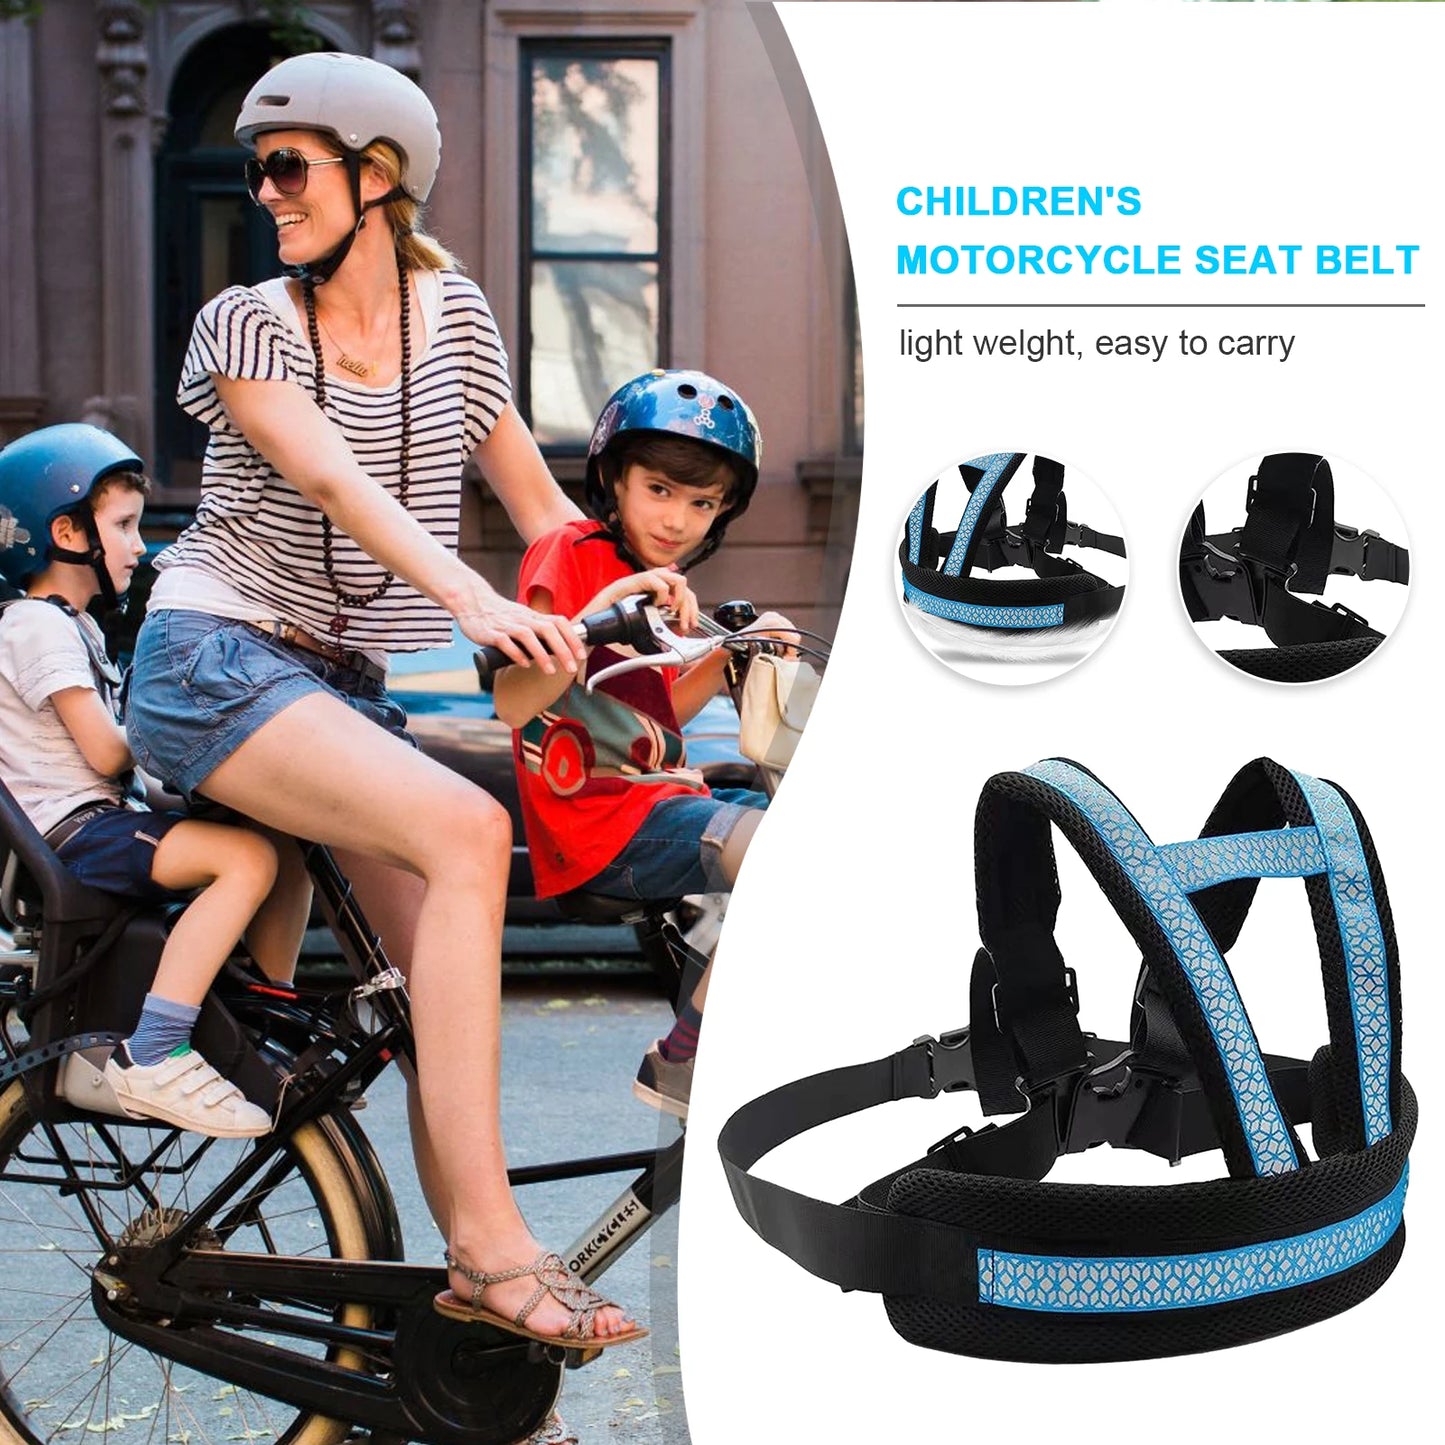 Children's Motorcycle Safety Harness- Ensure Your Child's Safety on Every Ride